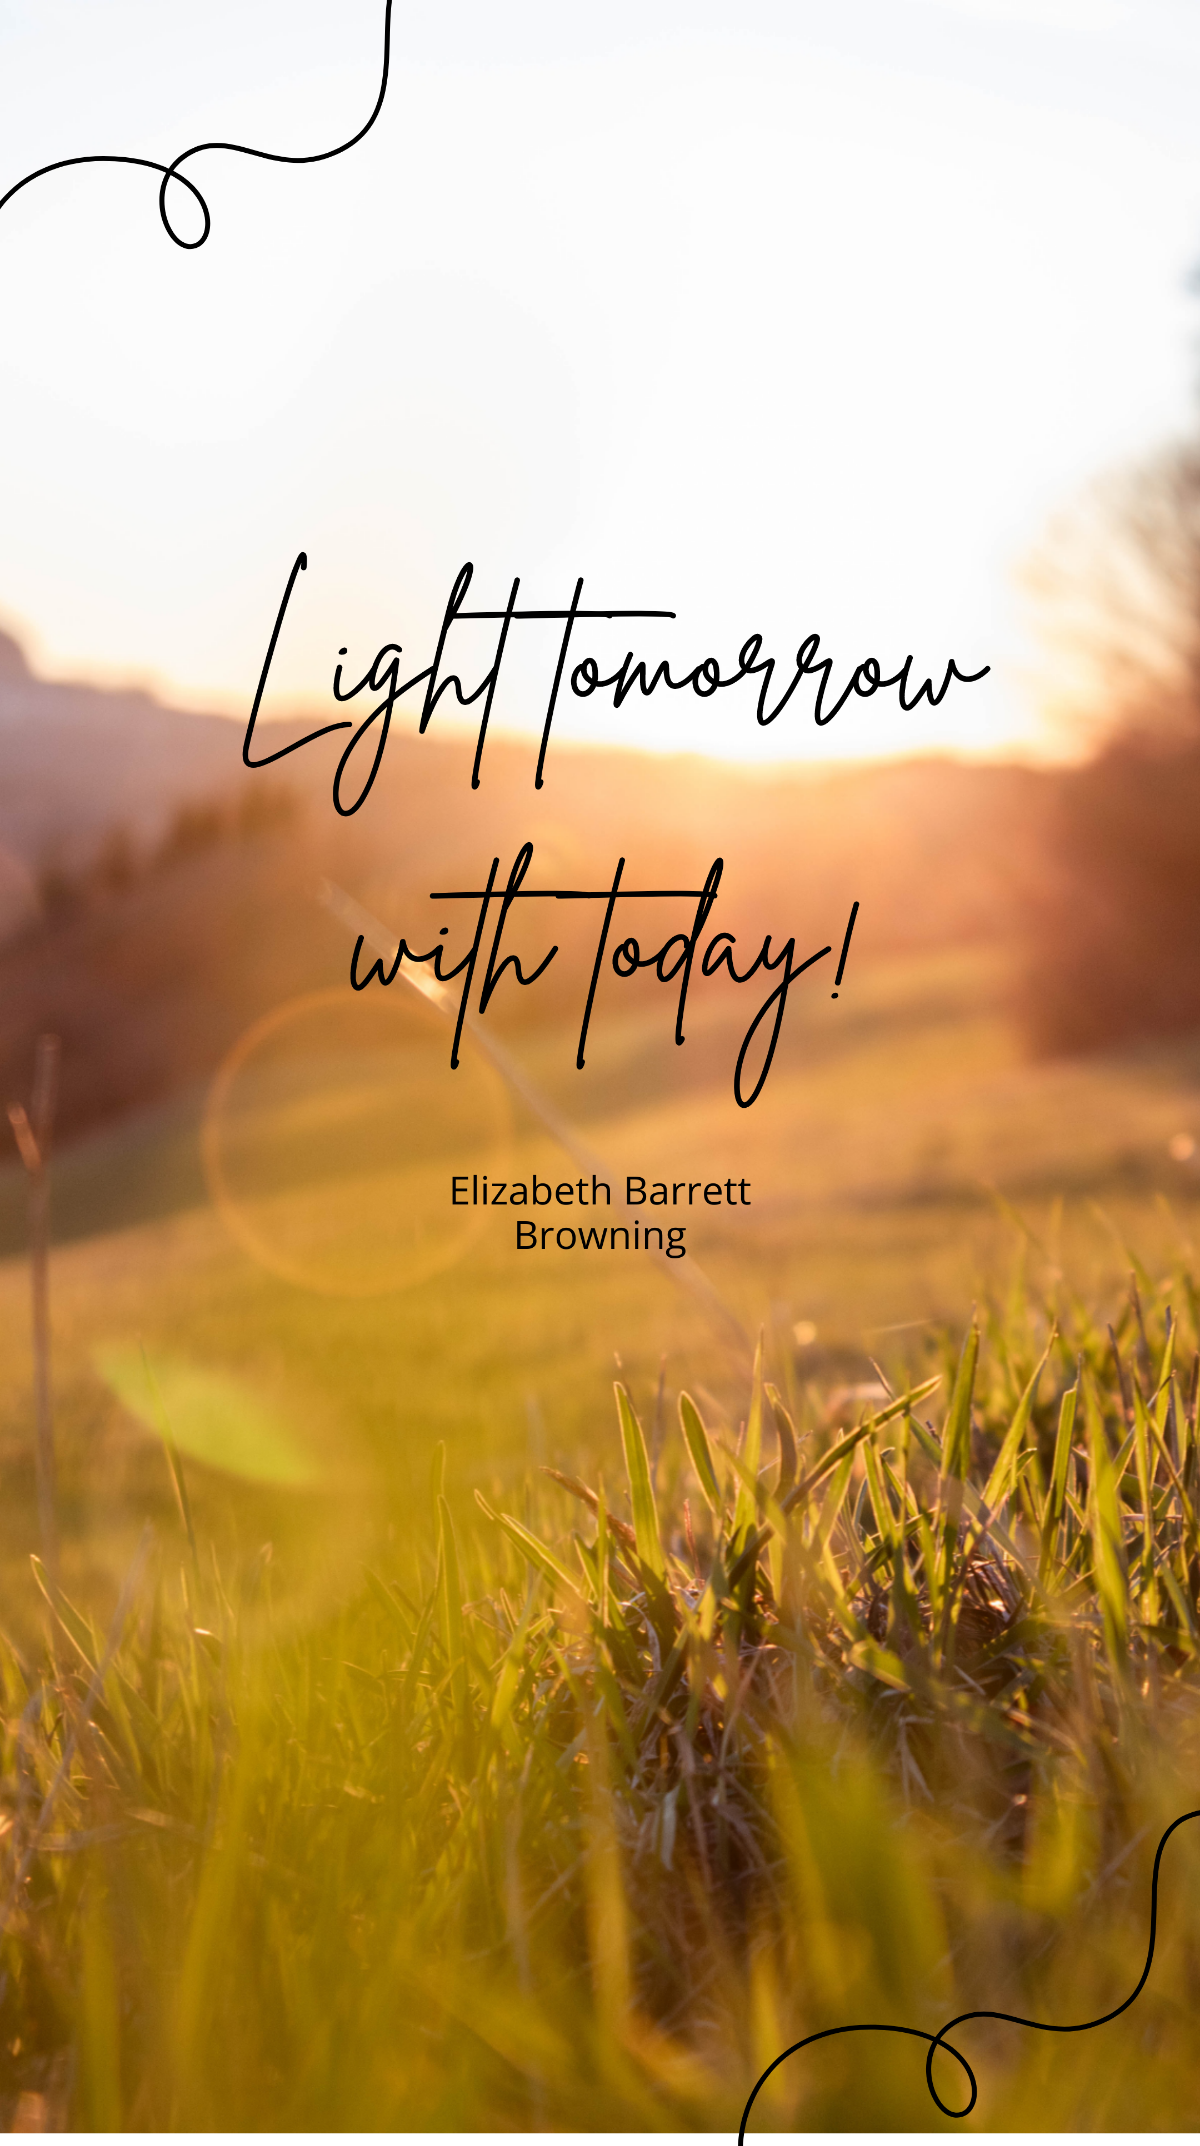 Elizabeth Barrett Browning - Light tomorrow with today! Template